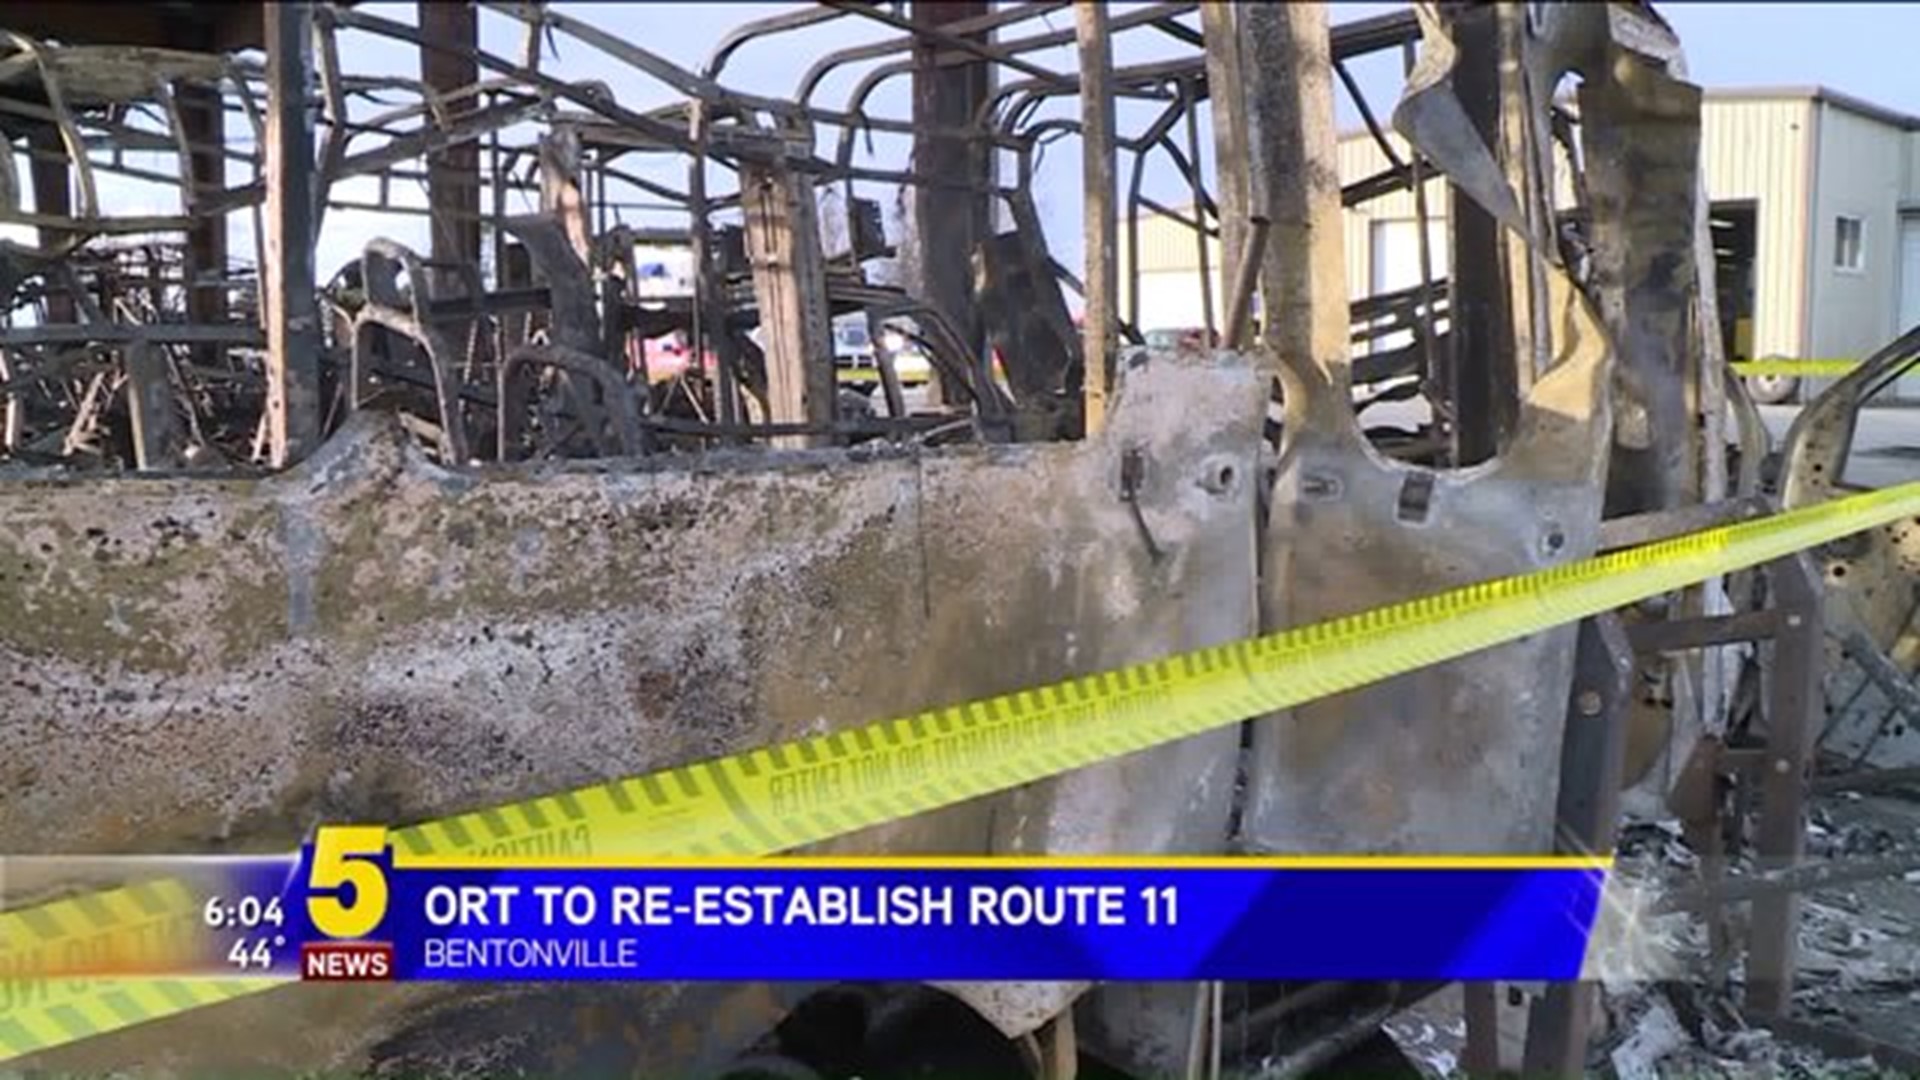 ORT: Bentonville Route 11 Back In Service On Monday